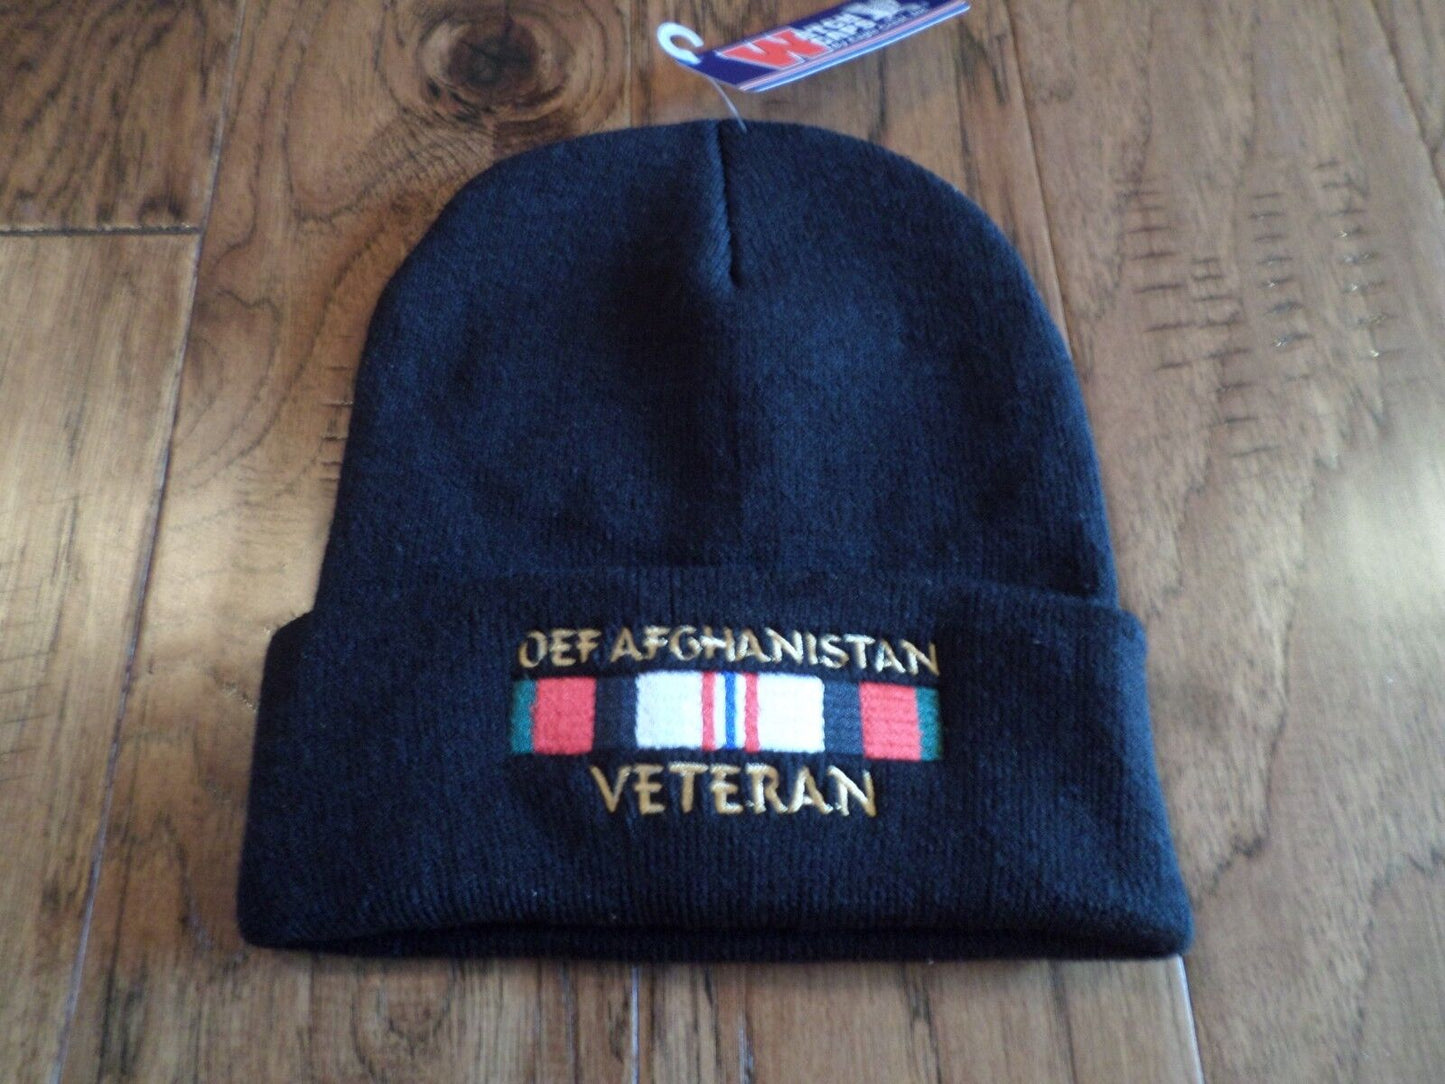 MILITARY STYLE WATCH CAP OEF AFGHANISTAN VETERAN 2PLY COLD WEATHER BEANIE